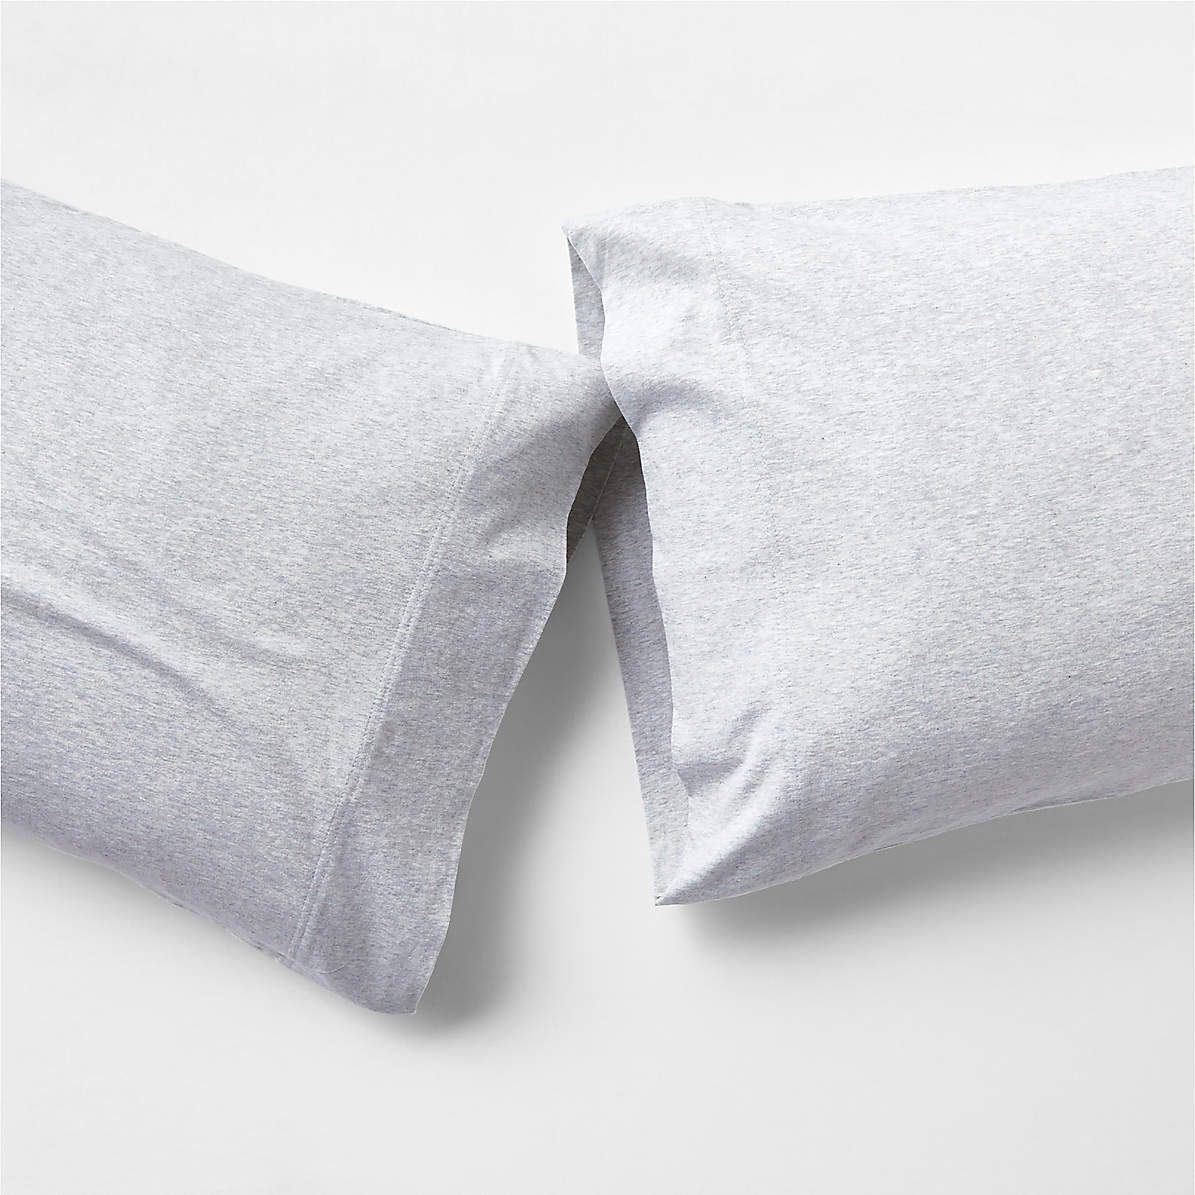 Levtex Home Washed Linen Square Pillow Cover, Set of 2 - Light Grey